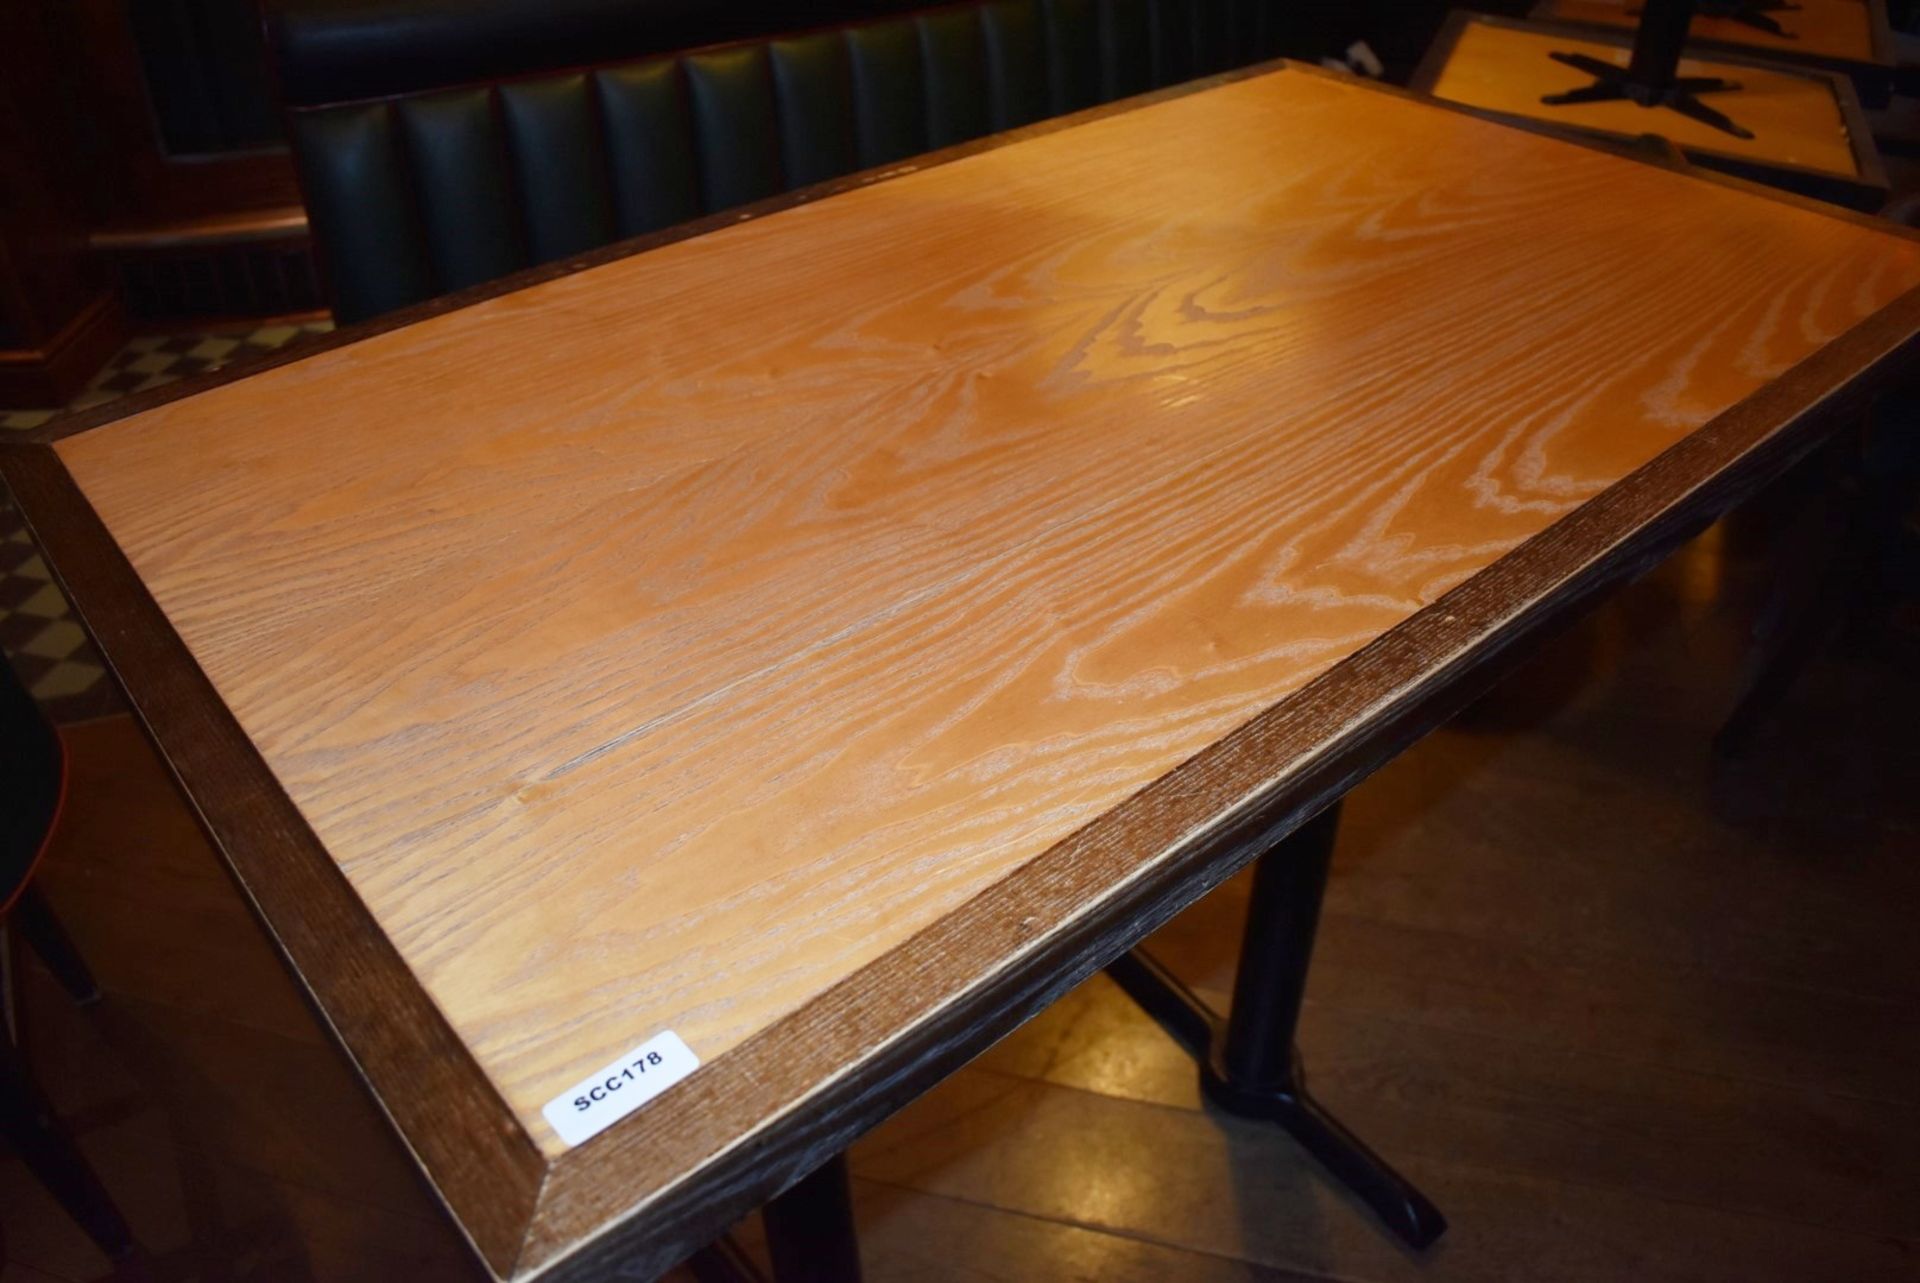 1 x Rectangular Restaurant Poser Table - Seats Upto 4 Persons - Two Tone Wooden Top & Cast Iron Base - Image 3 of 3